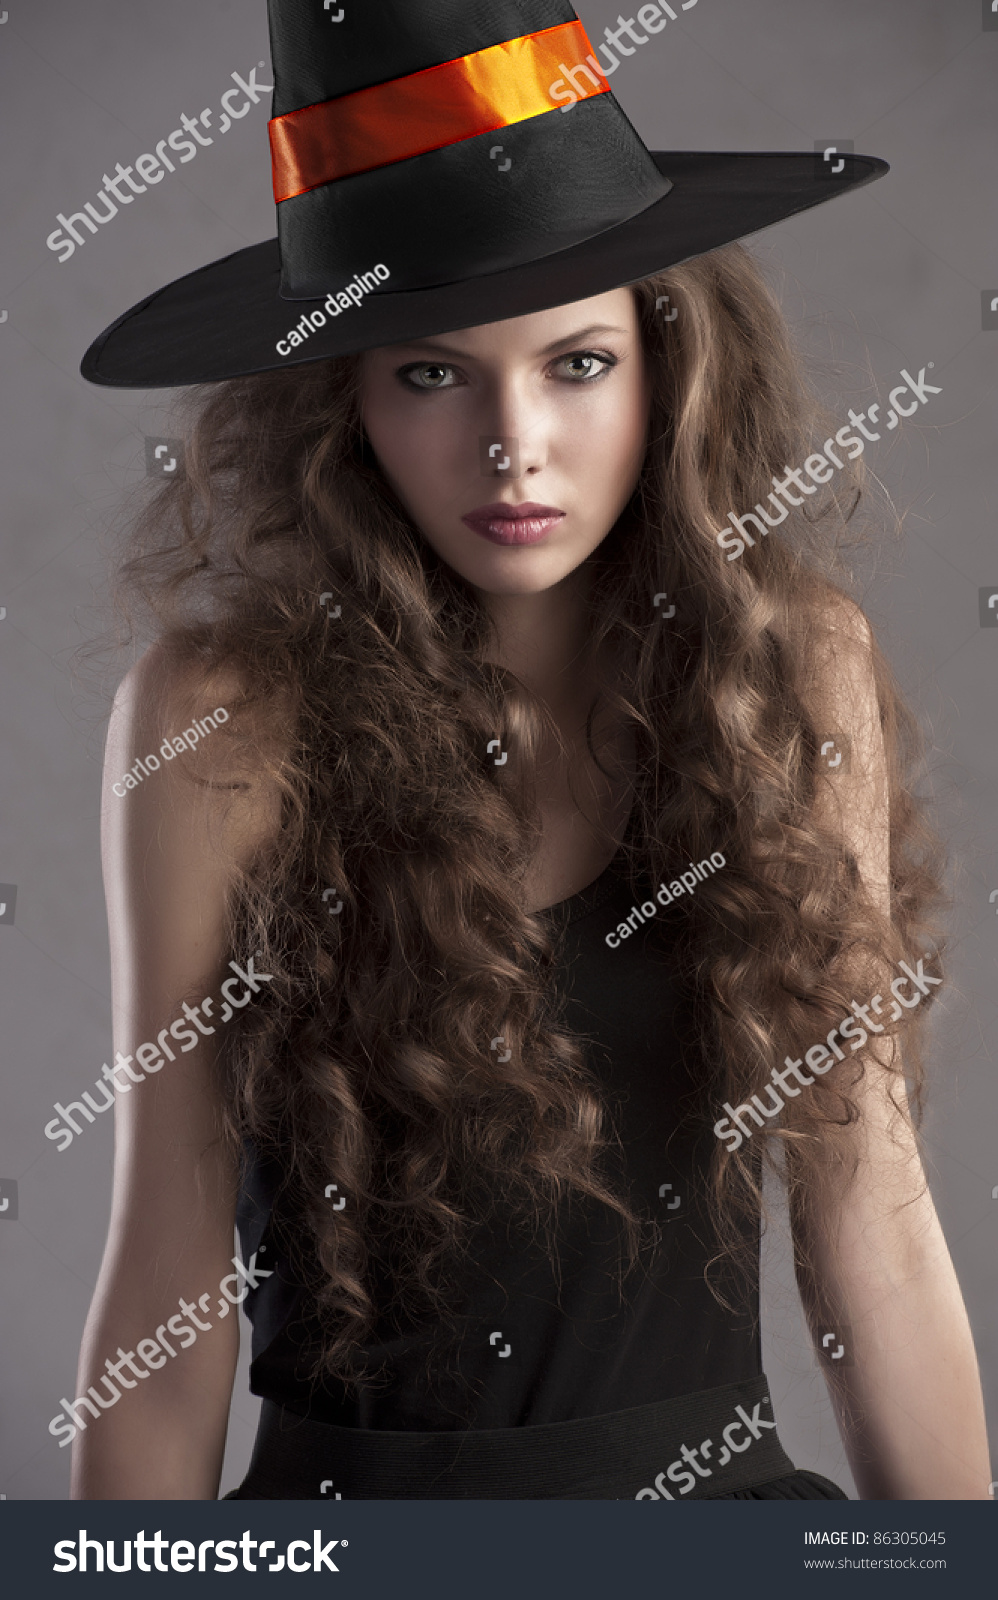 Face Shot Of A Young And Beautiful Girl Dressed Up For Halloween With A ...